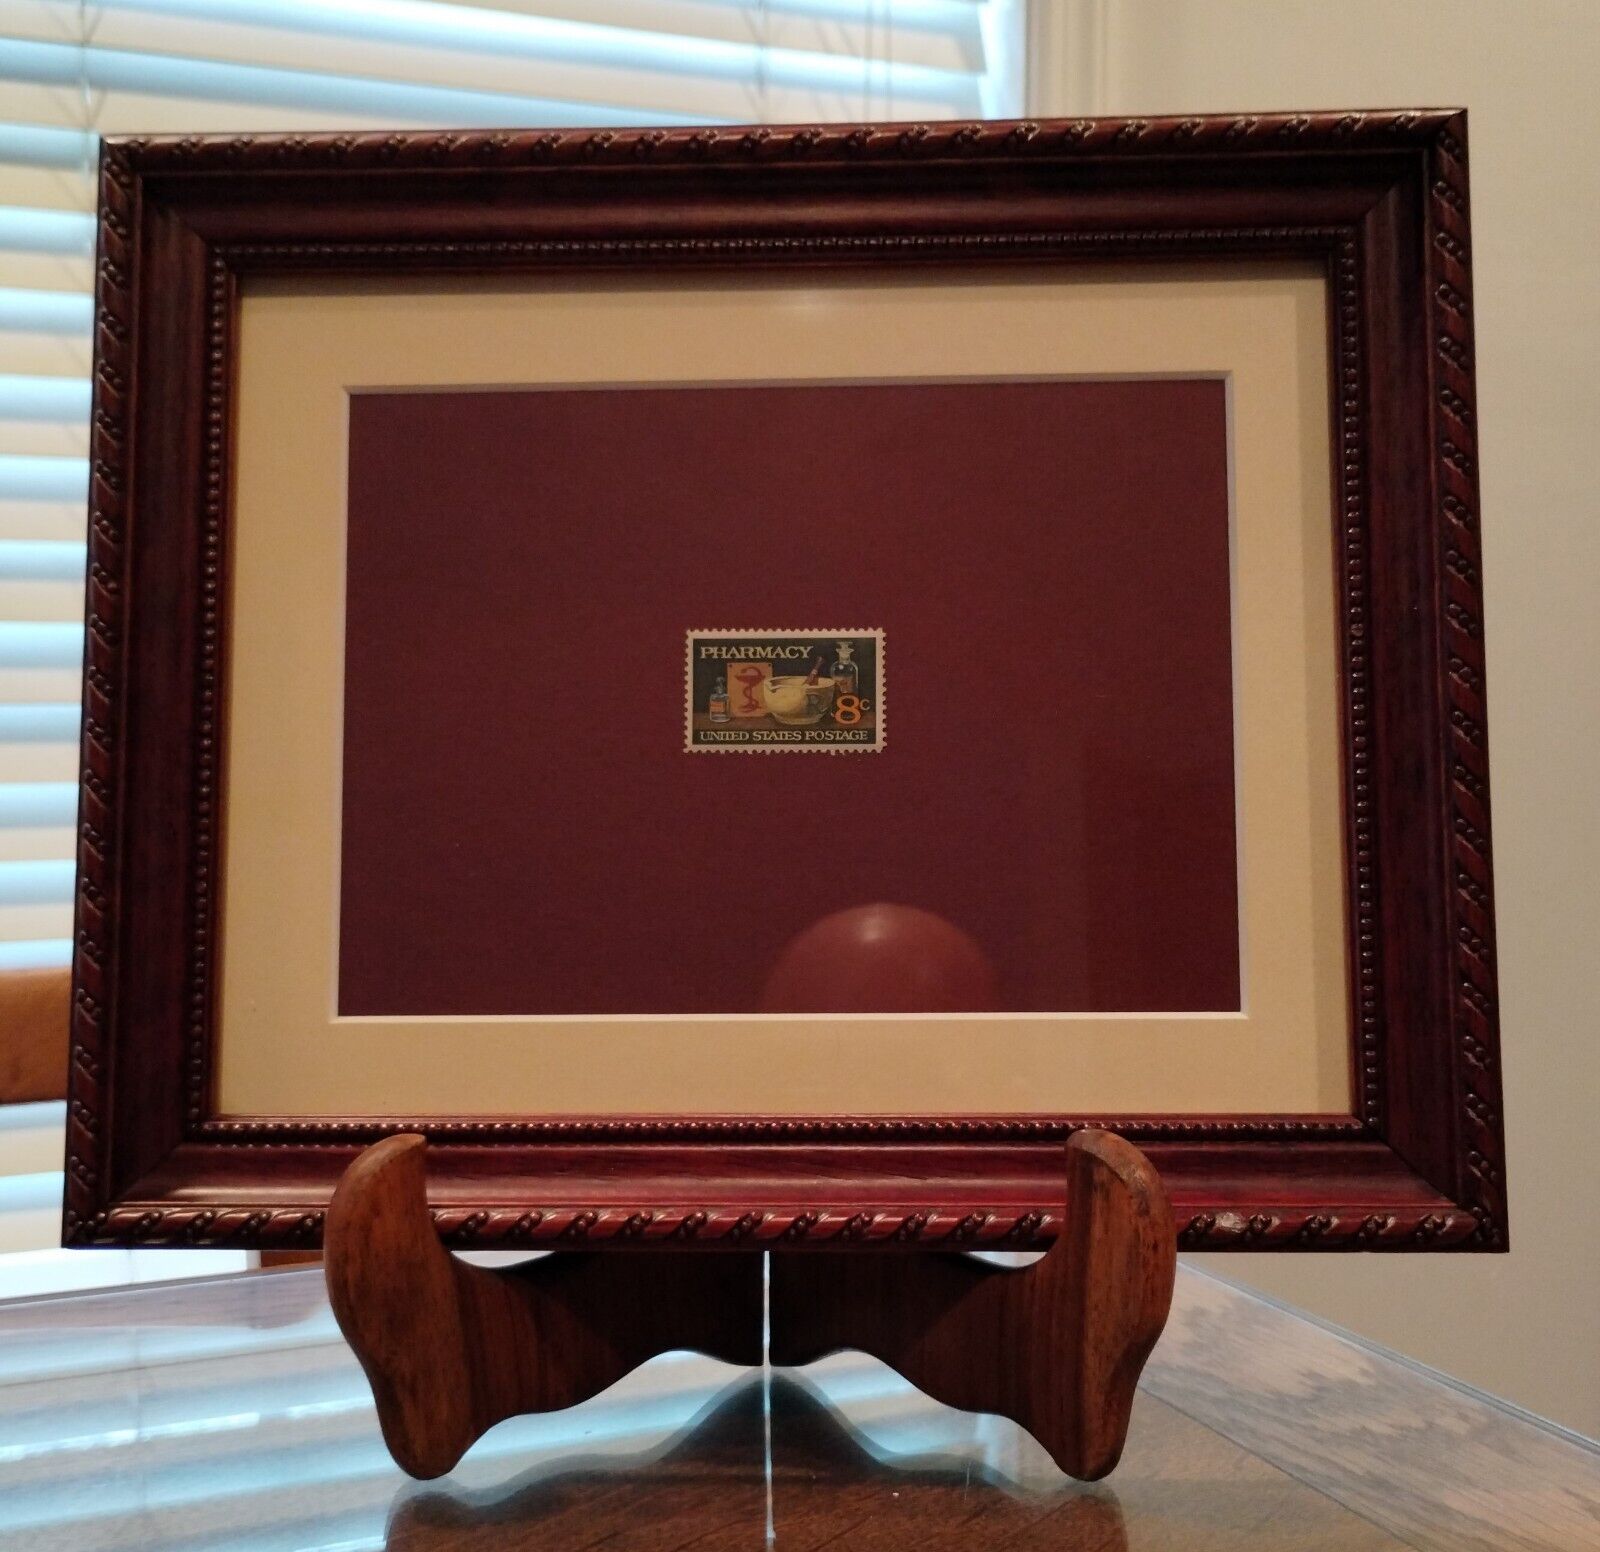 1972 Pharmacy Stamp, 8 cent, professionally matted & framed with wood easel